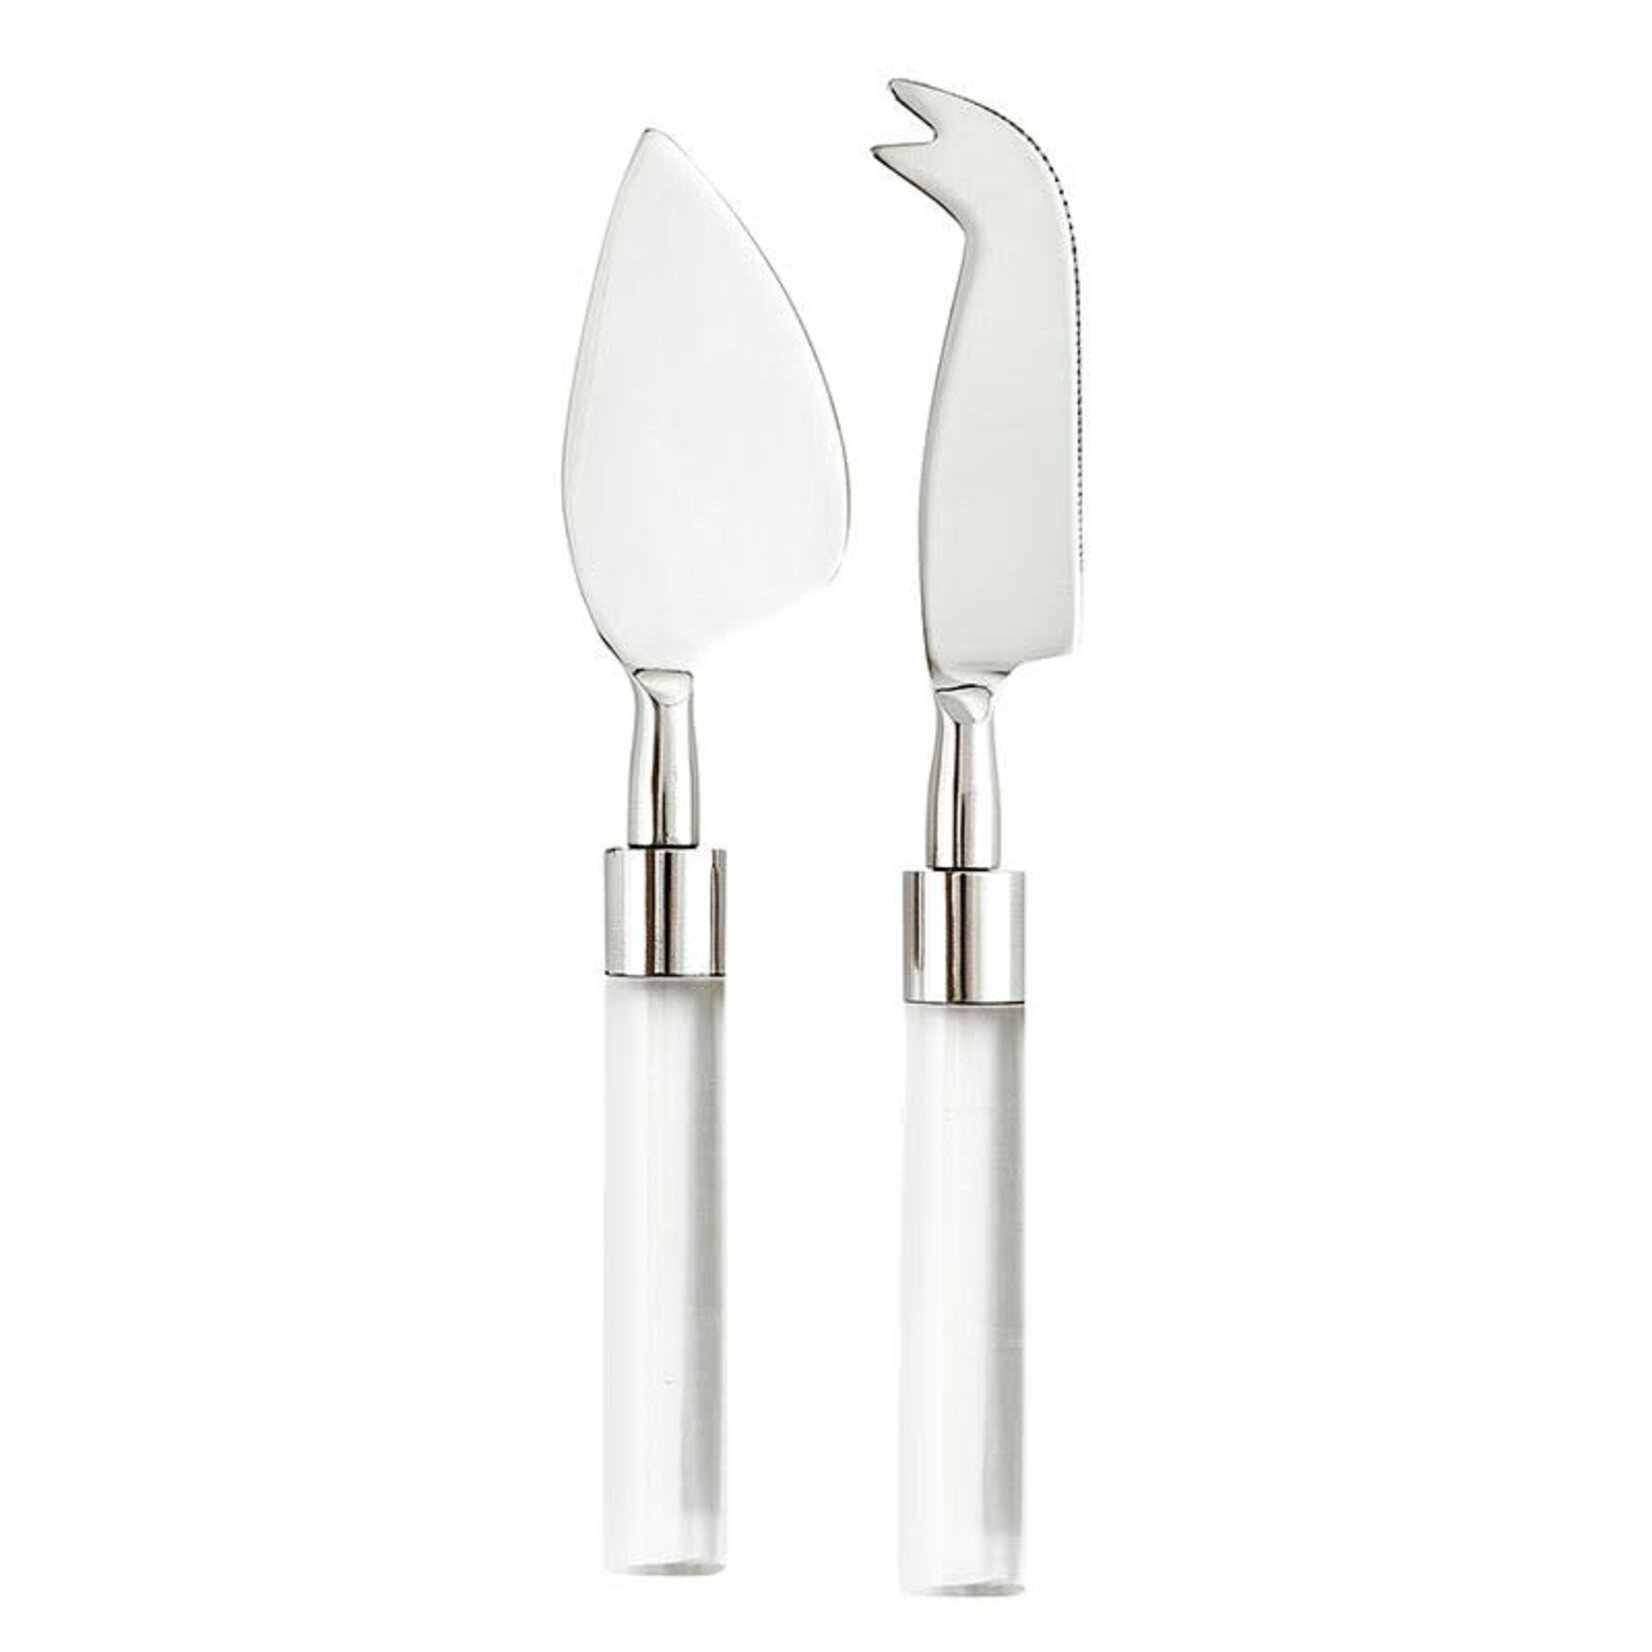 Outside The Box Set Of 2 Lucite Stainless Steel & Acrylic Cheese Knives